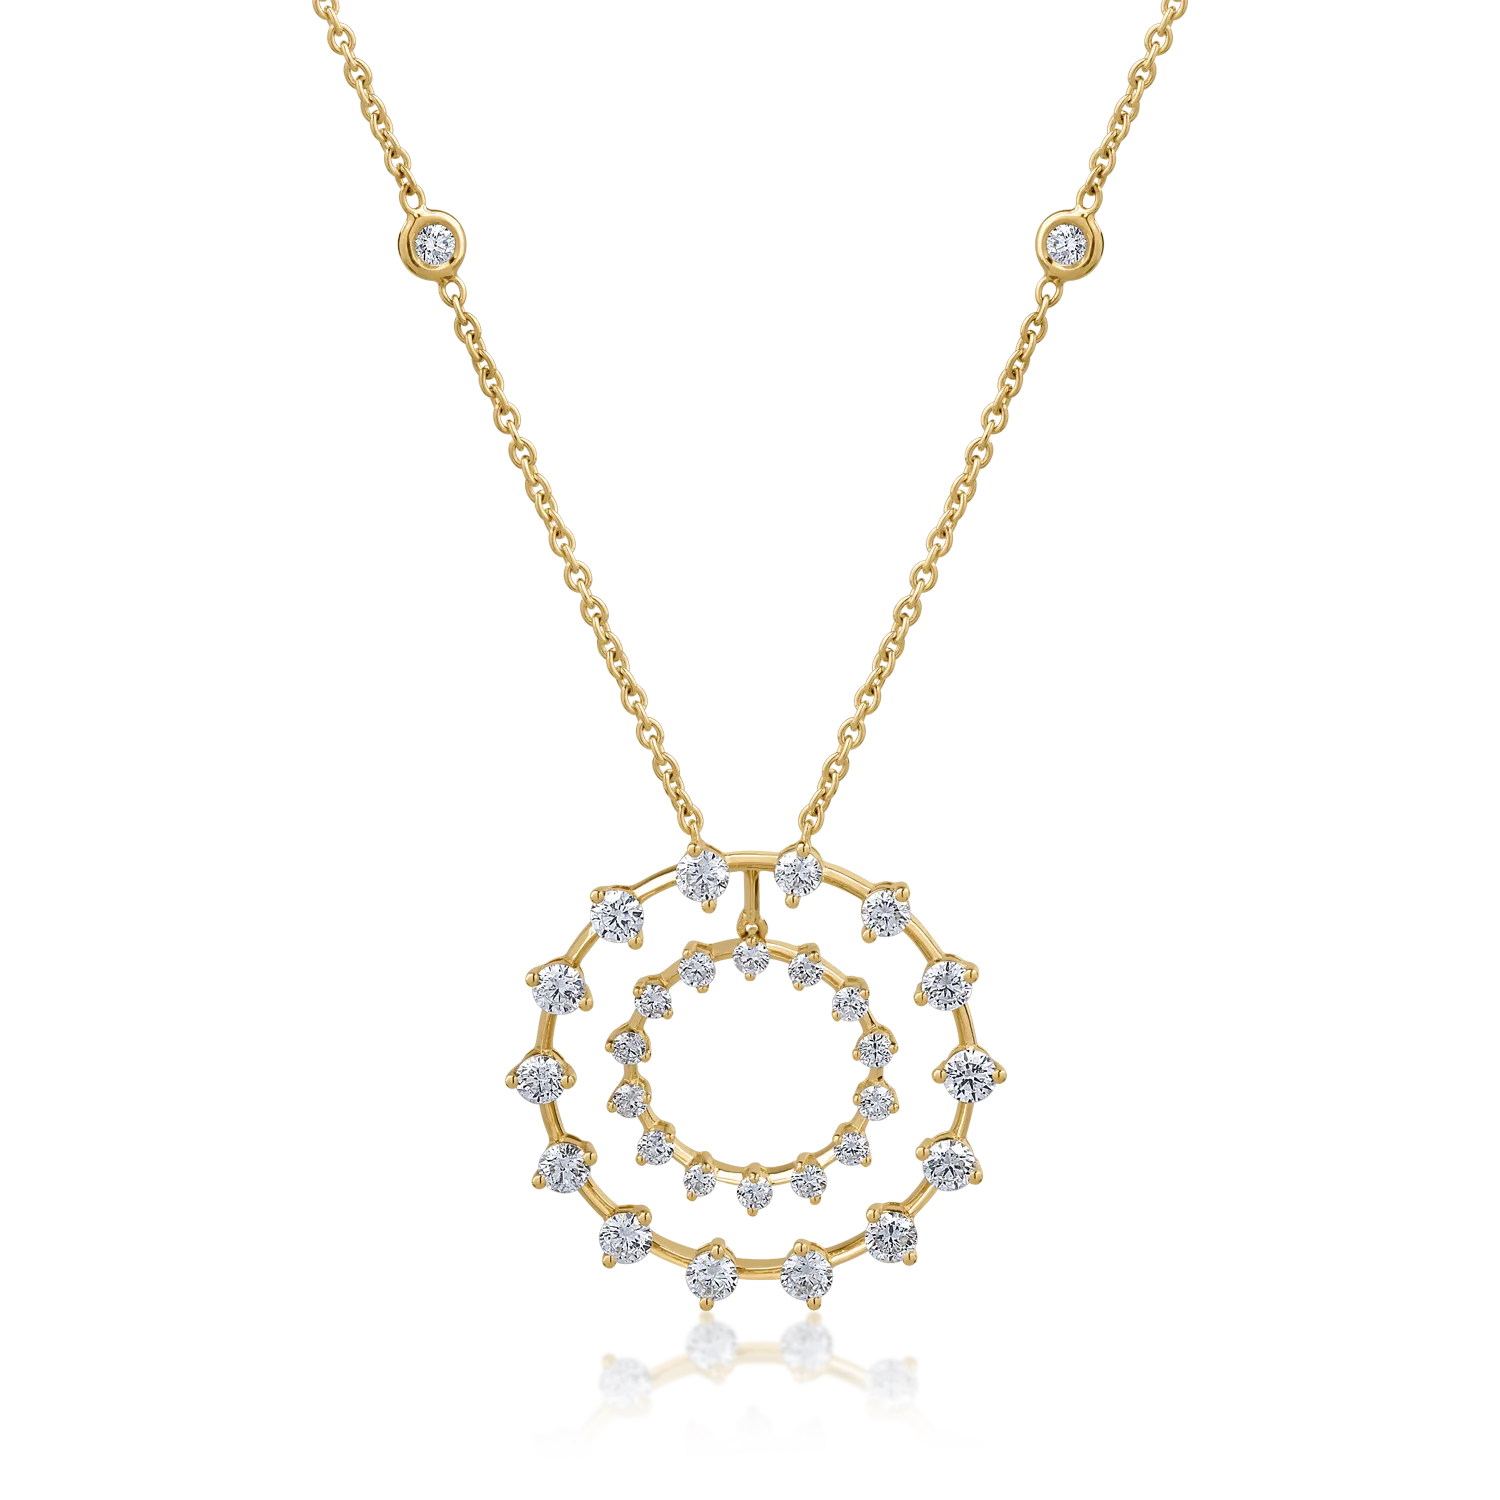 18K yellow gold pendant necklace with 1.88ct diamonds